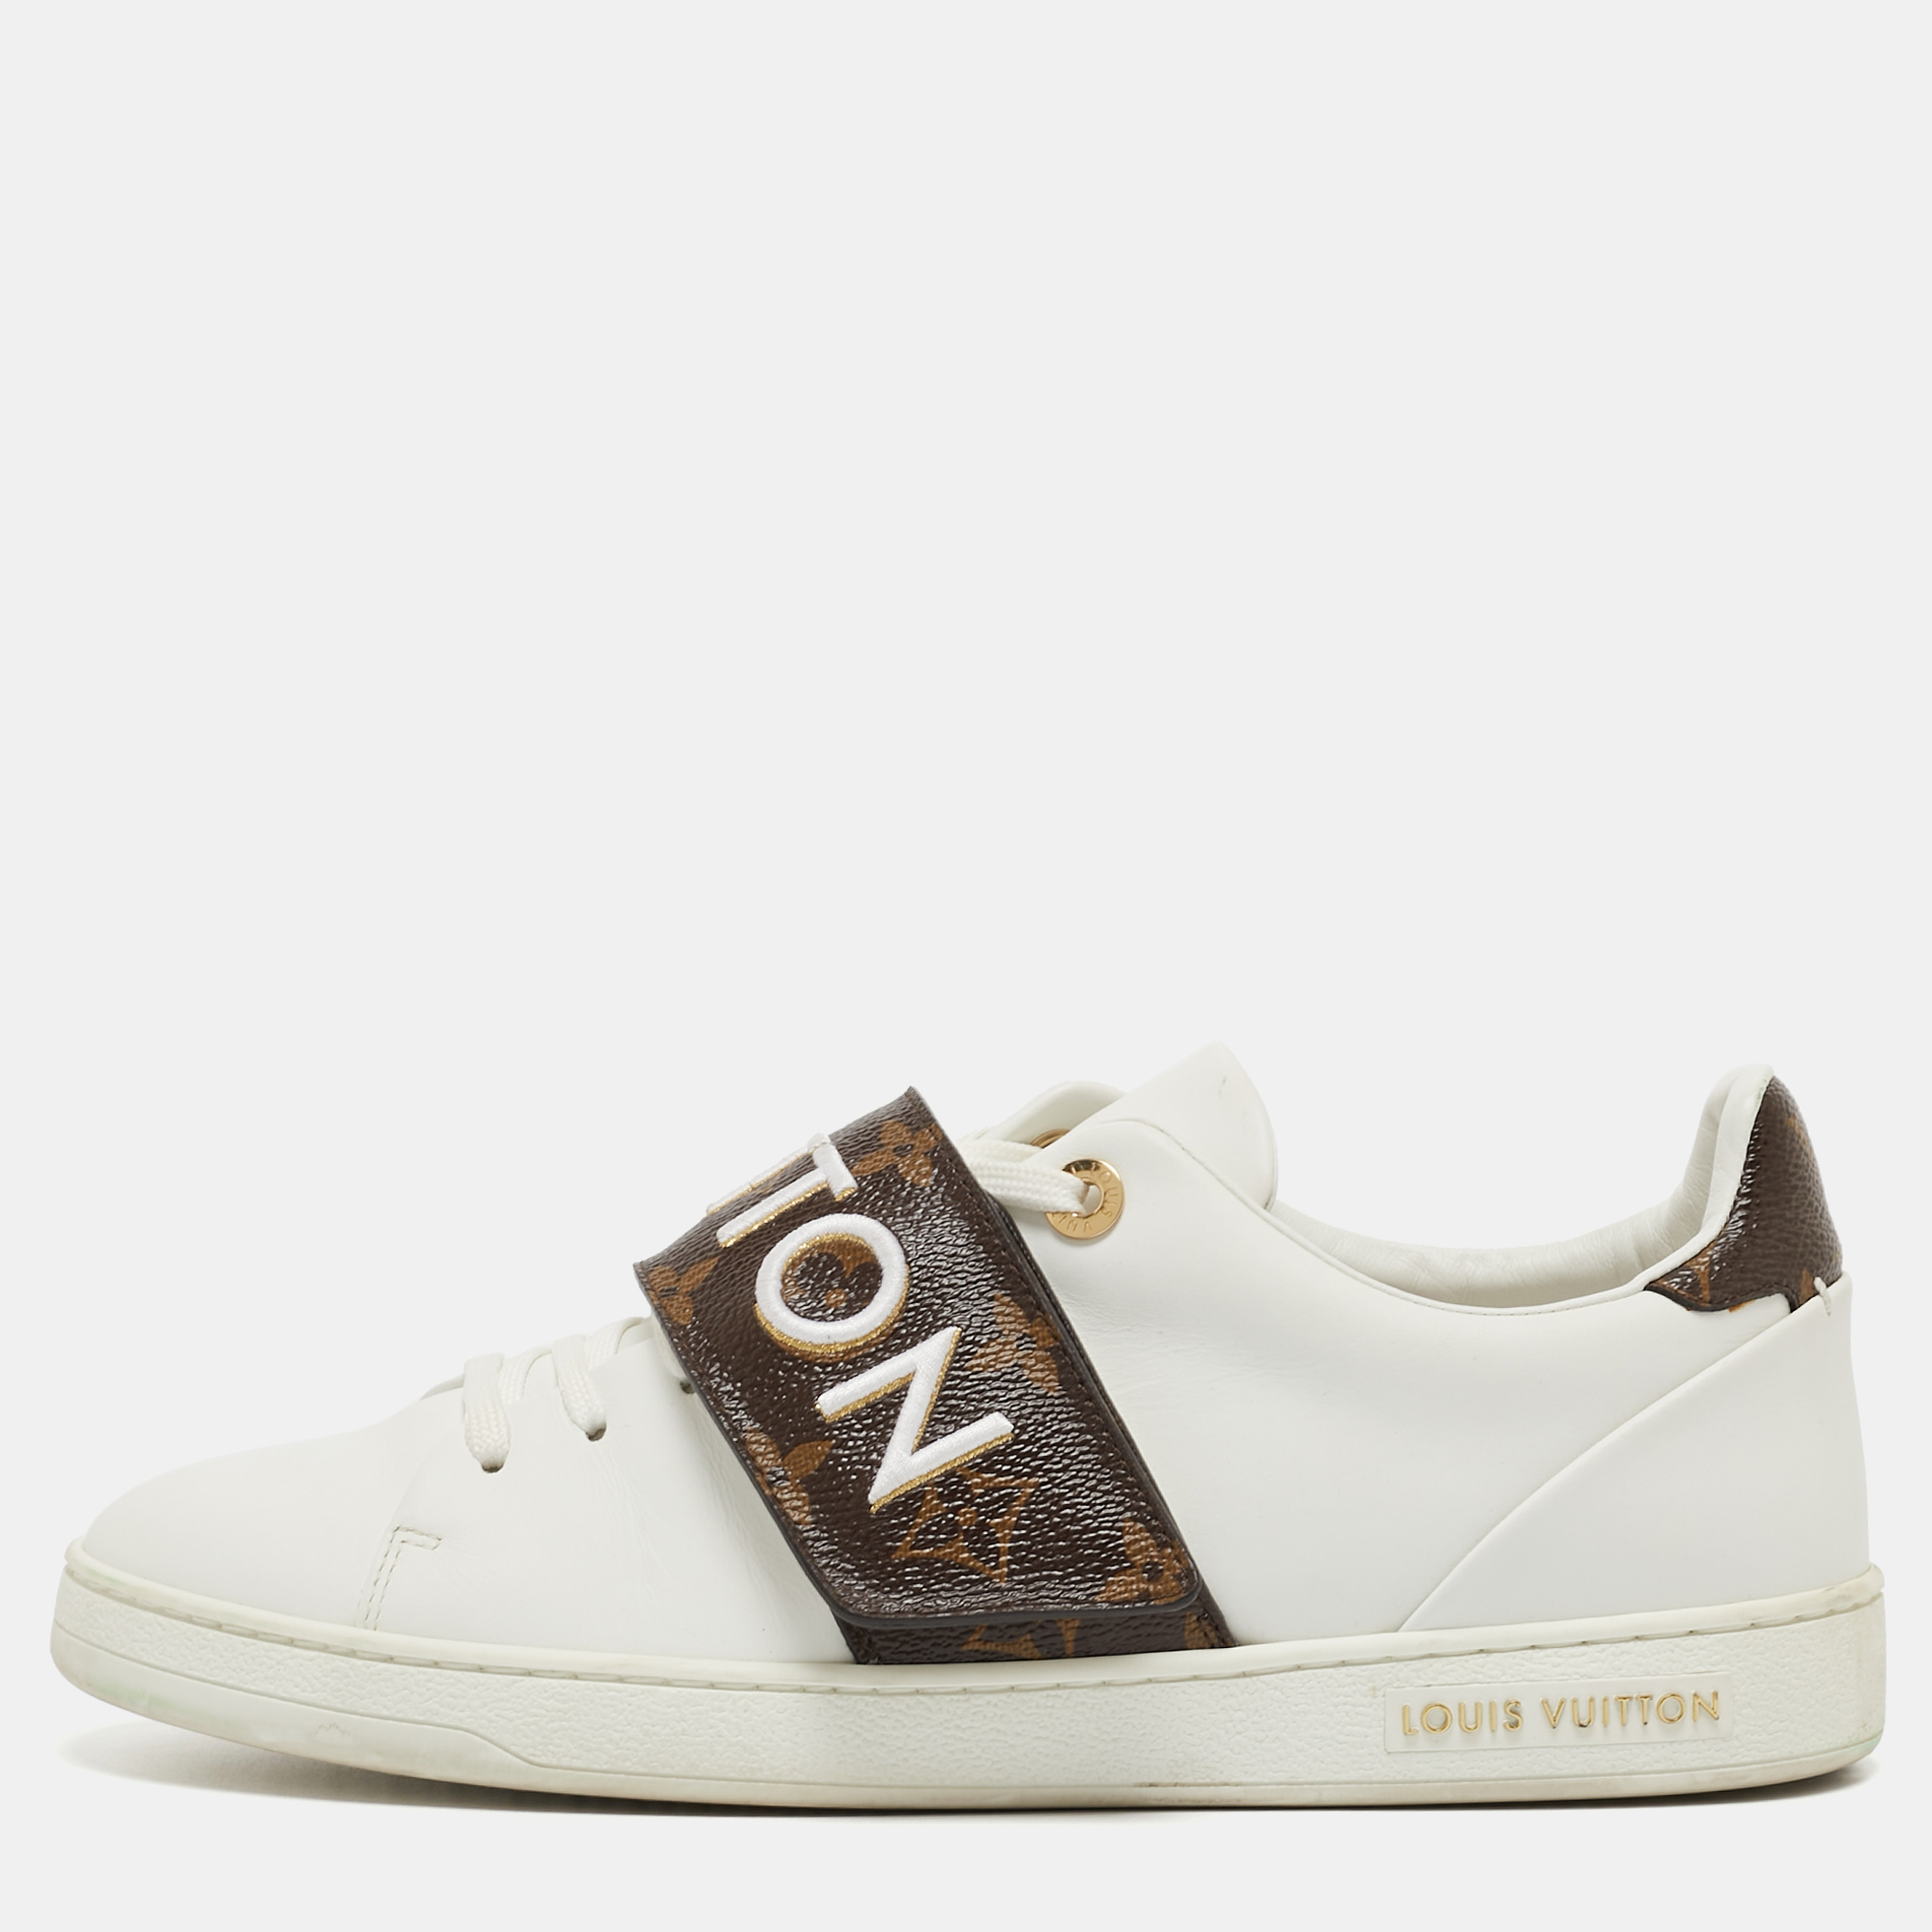 A great way to elevate your casual look these white sneakers from Louis Vuitton feature a contrasting velcro strap over the lace up vamps. The brand name vamps adds a luxe touch to the design.